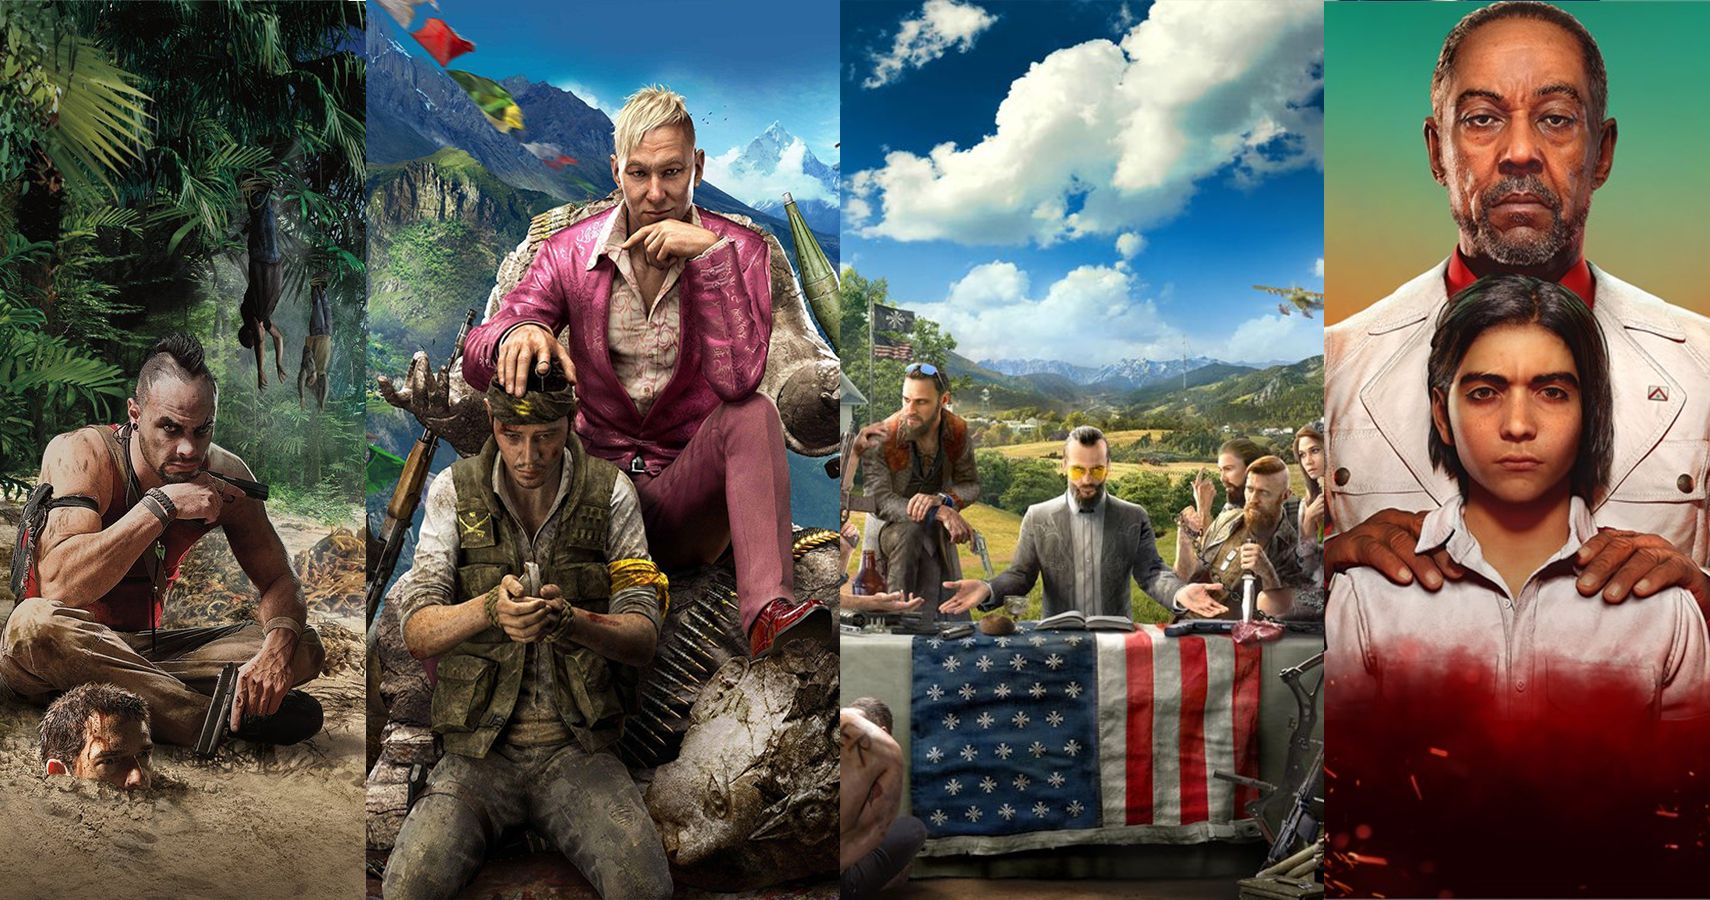 Will Far Cry 6 Break The Franchise's Cycle Of Repetitive Gameplay?